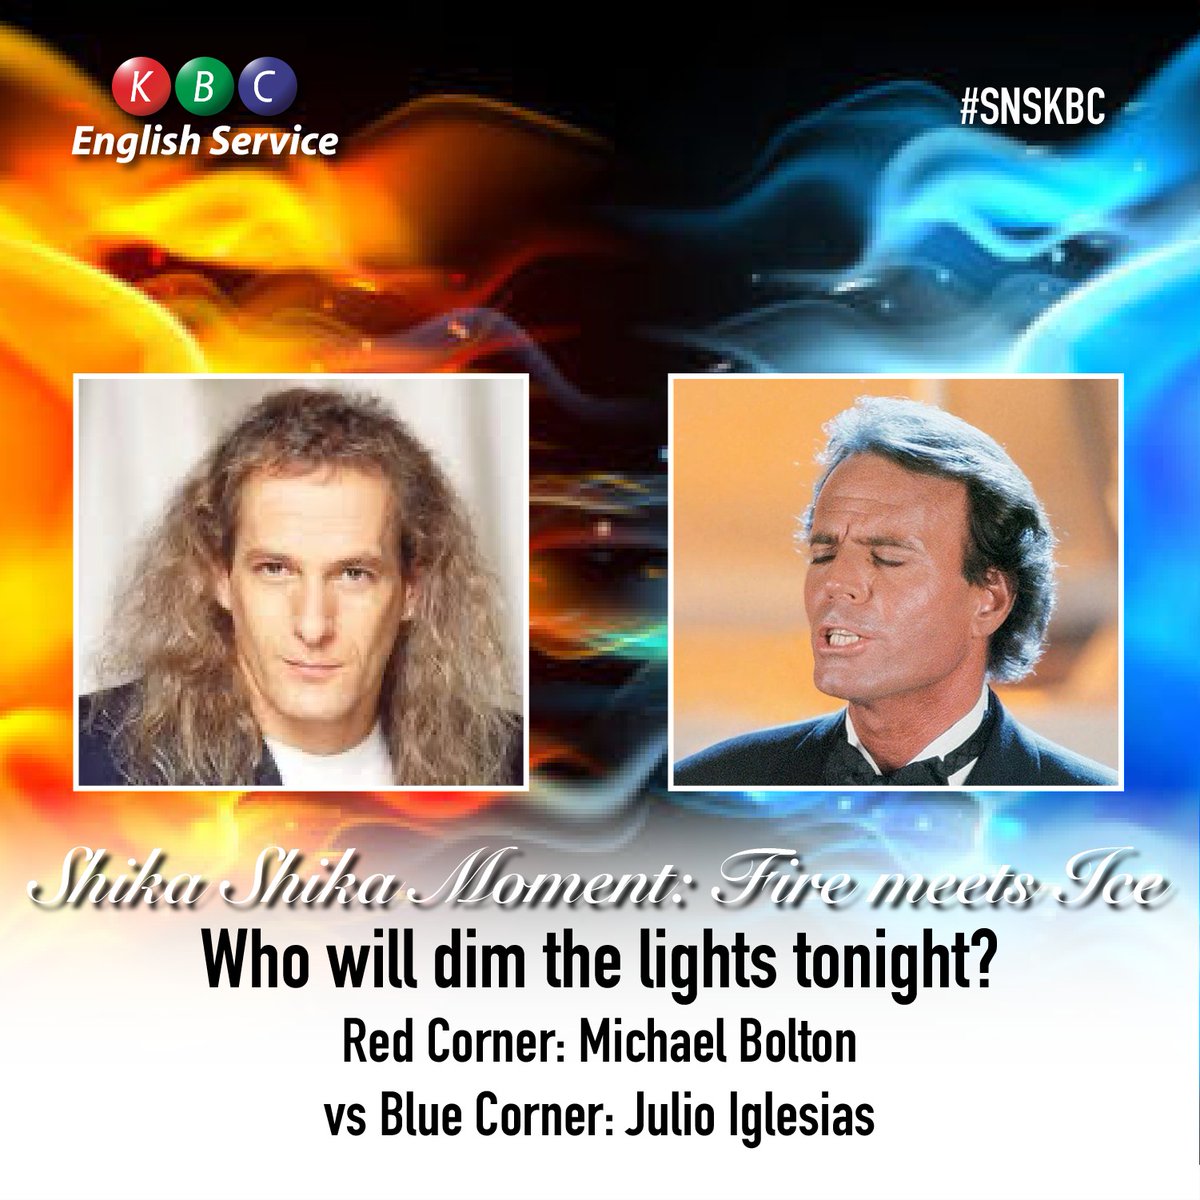 Shika Shika Moment: Fire meets Ice. What love songs do want tonight? Who will dim the lights Red Corner: Michael Bolton vs Blue Corner: Julio Iglesias. Your requests @kbcenglish @johnkaranijk . Goodtimes are back. #snskbc